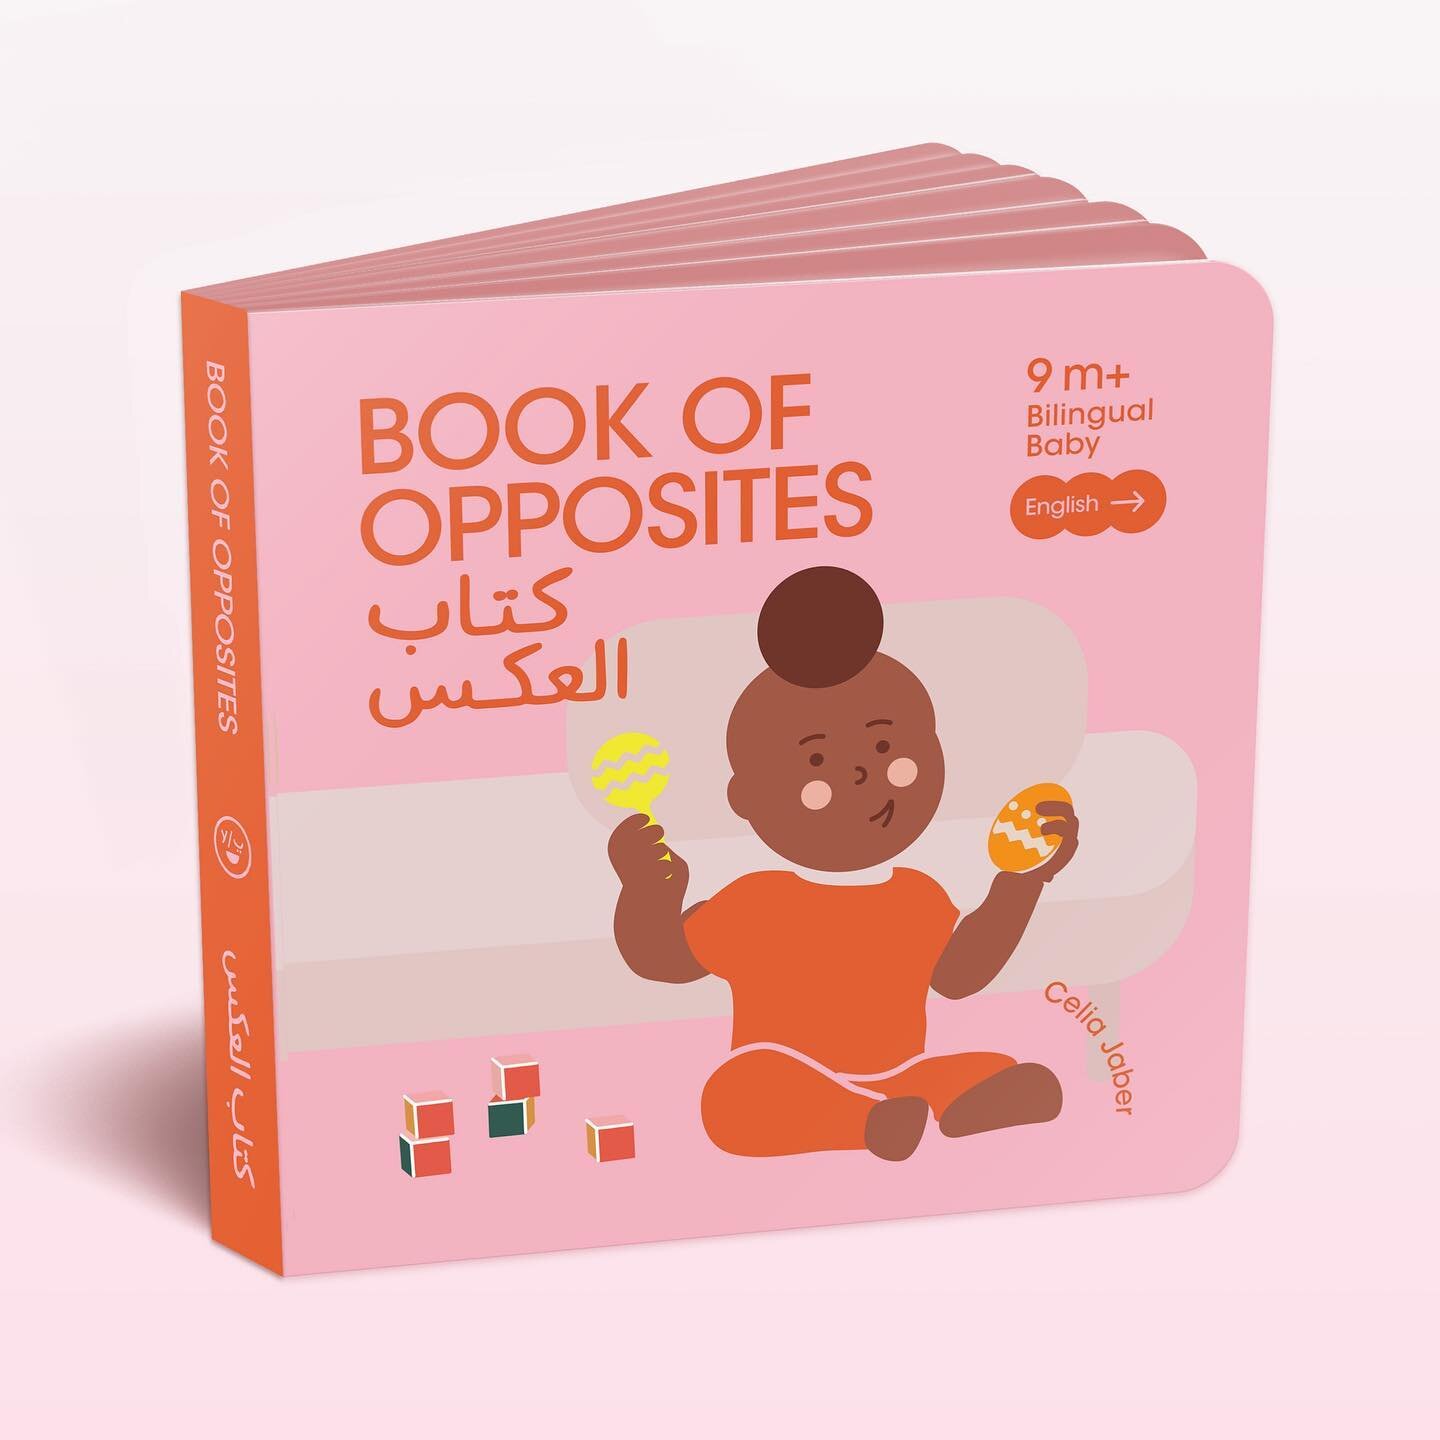 Introducing!! A creative take on the opposites concept. One book. Two front covers, and two languages. Let&rsquo;s read the English side first, or should we start with the opposite Arabic side? Be playful and go back &amp; forth to compare &amp; lear